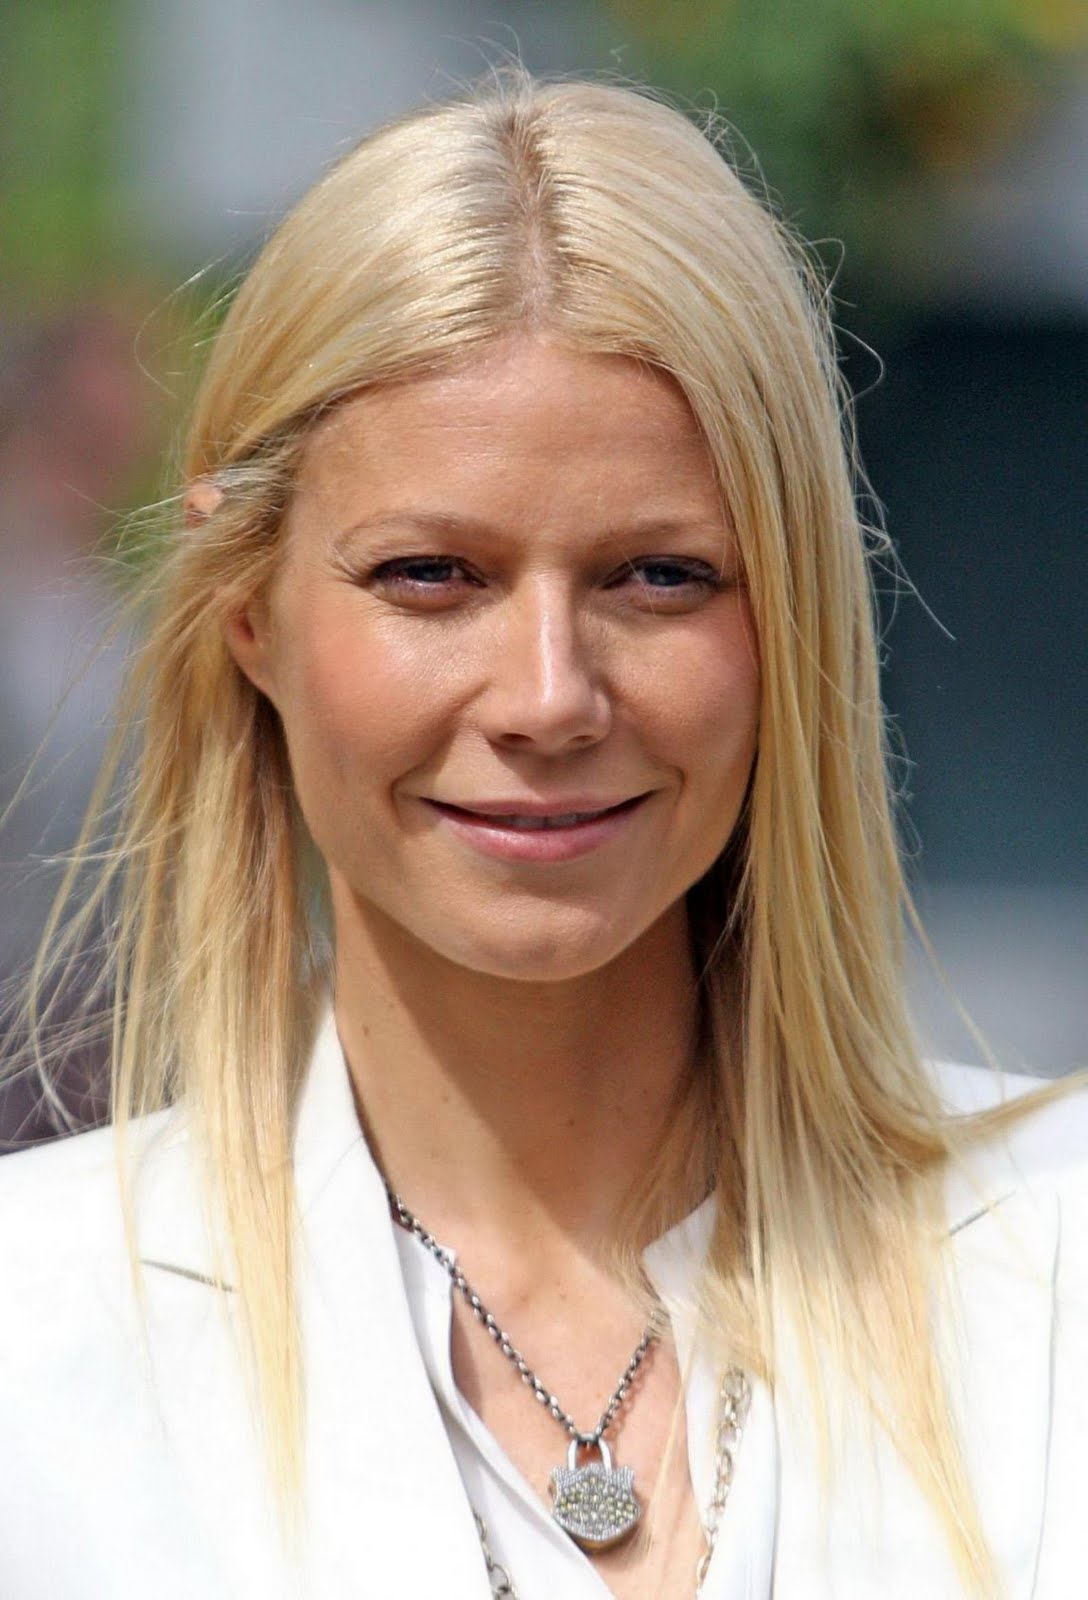 http://4.bp.blogspot.com/-QtYnl70zf7Y/Te1dZykS9ZI/AAAAAAAAKkM/6po57ZtfF-o/s1600/US+actress+Gwyneth+Paltrow+poses+for+a+photograph+at+the+Chelsea+Flower+Show+in+London%252C+on+May+23%252C+2011.+%25282%2529.jpg